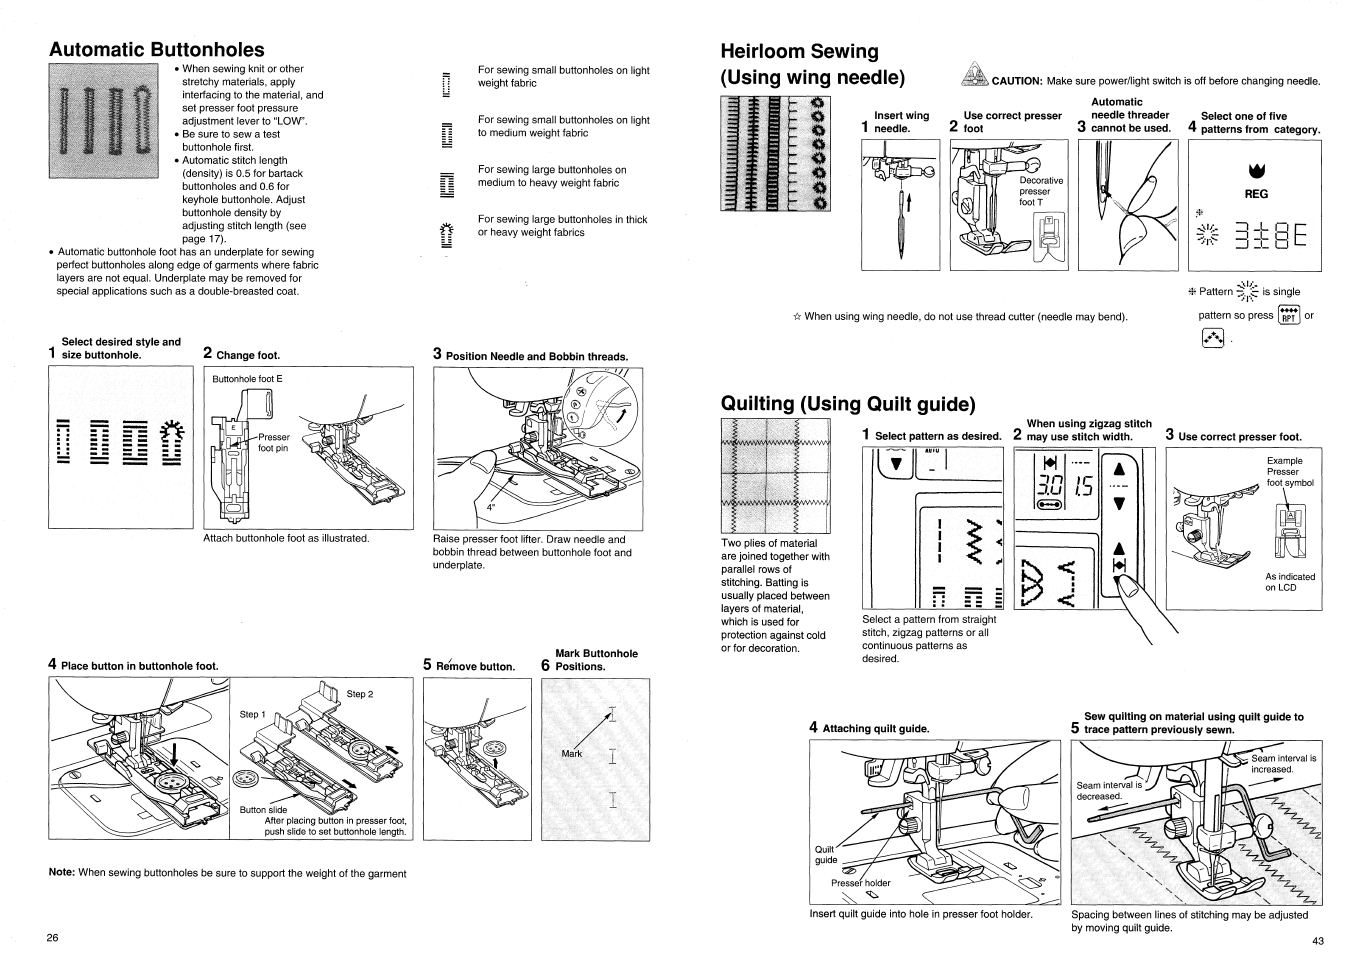 Automatic buttonholes, Select desired style and 1 size buttonhole, 4 place button in buttonhole foot | 5 remove button, Mark buttonhole 6 positions, Automatic buttonholes ,27 | SINGER XL100 Quantum User Manual | Page 28 / 72